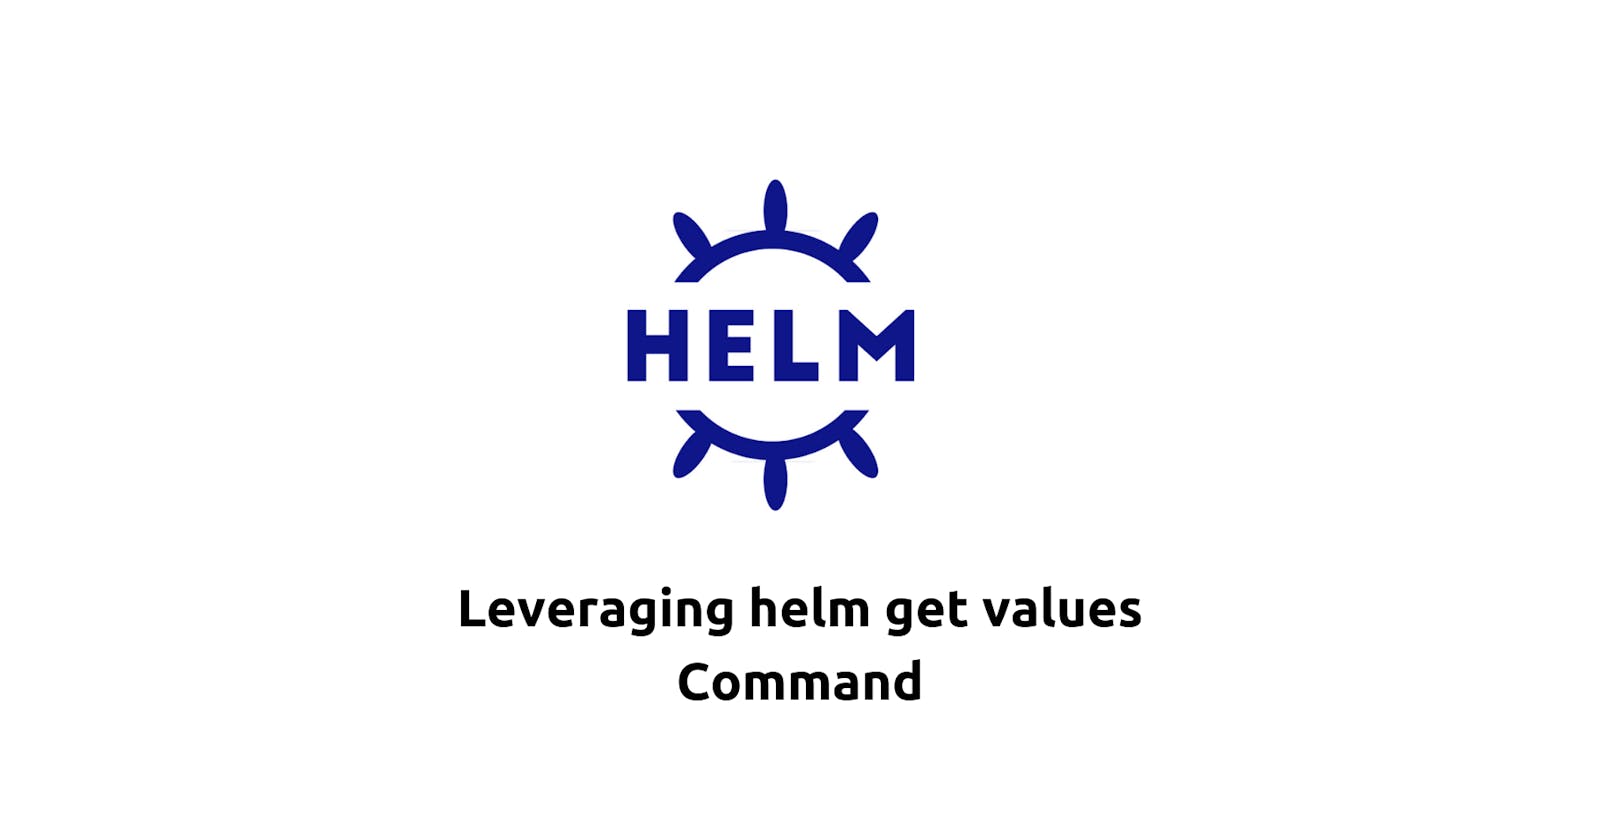 Leveraging helm get values Command